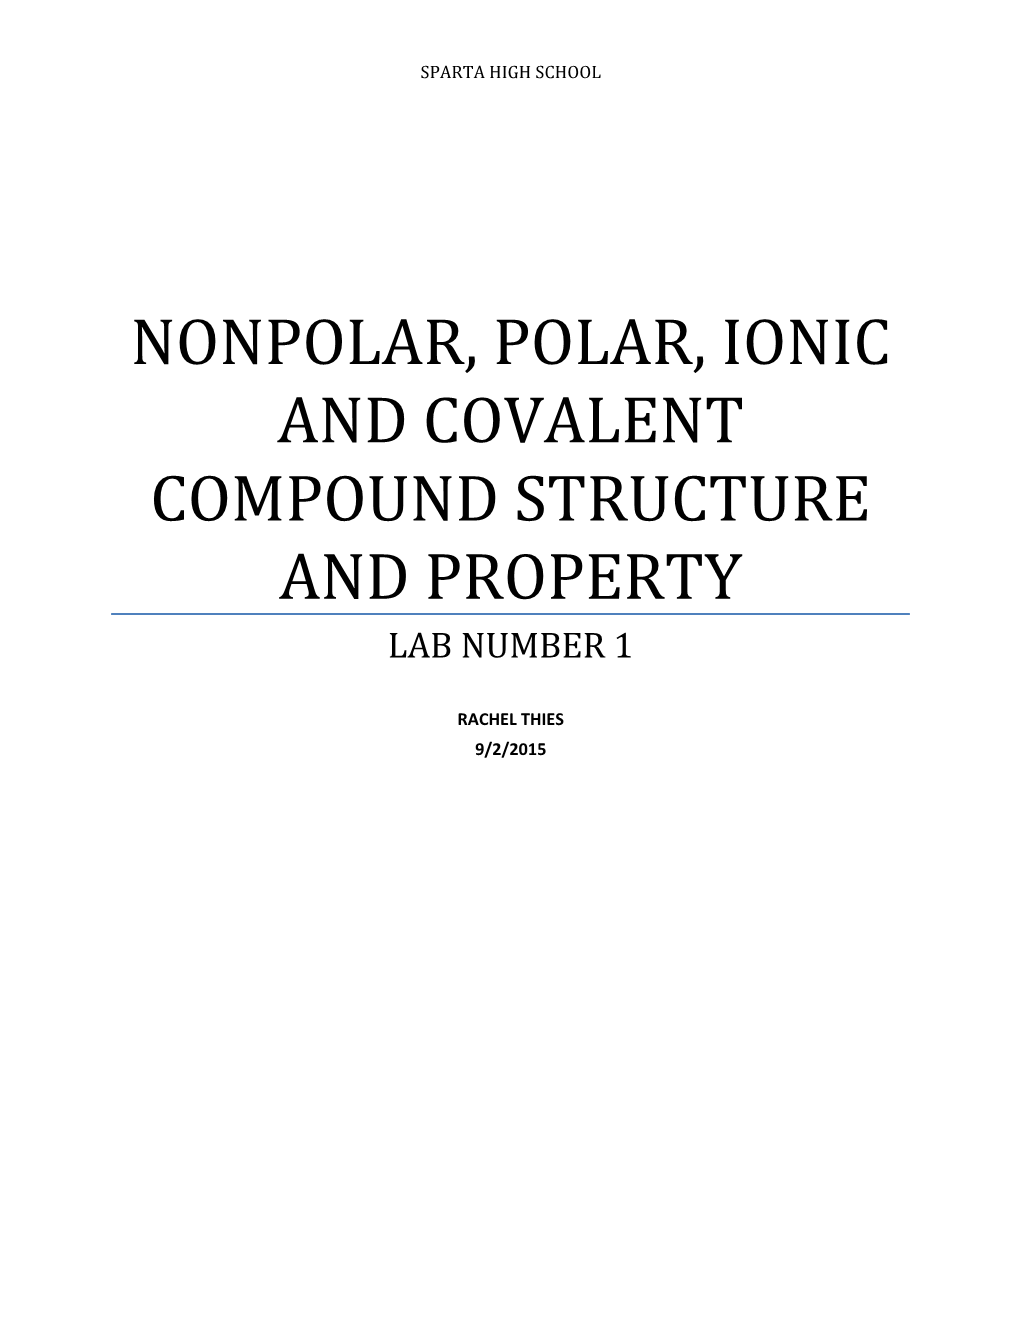 Nonpolar, Polar, Ionic and Covalent Compound Structure and Property